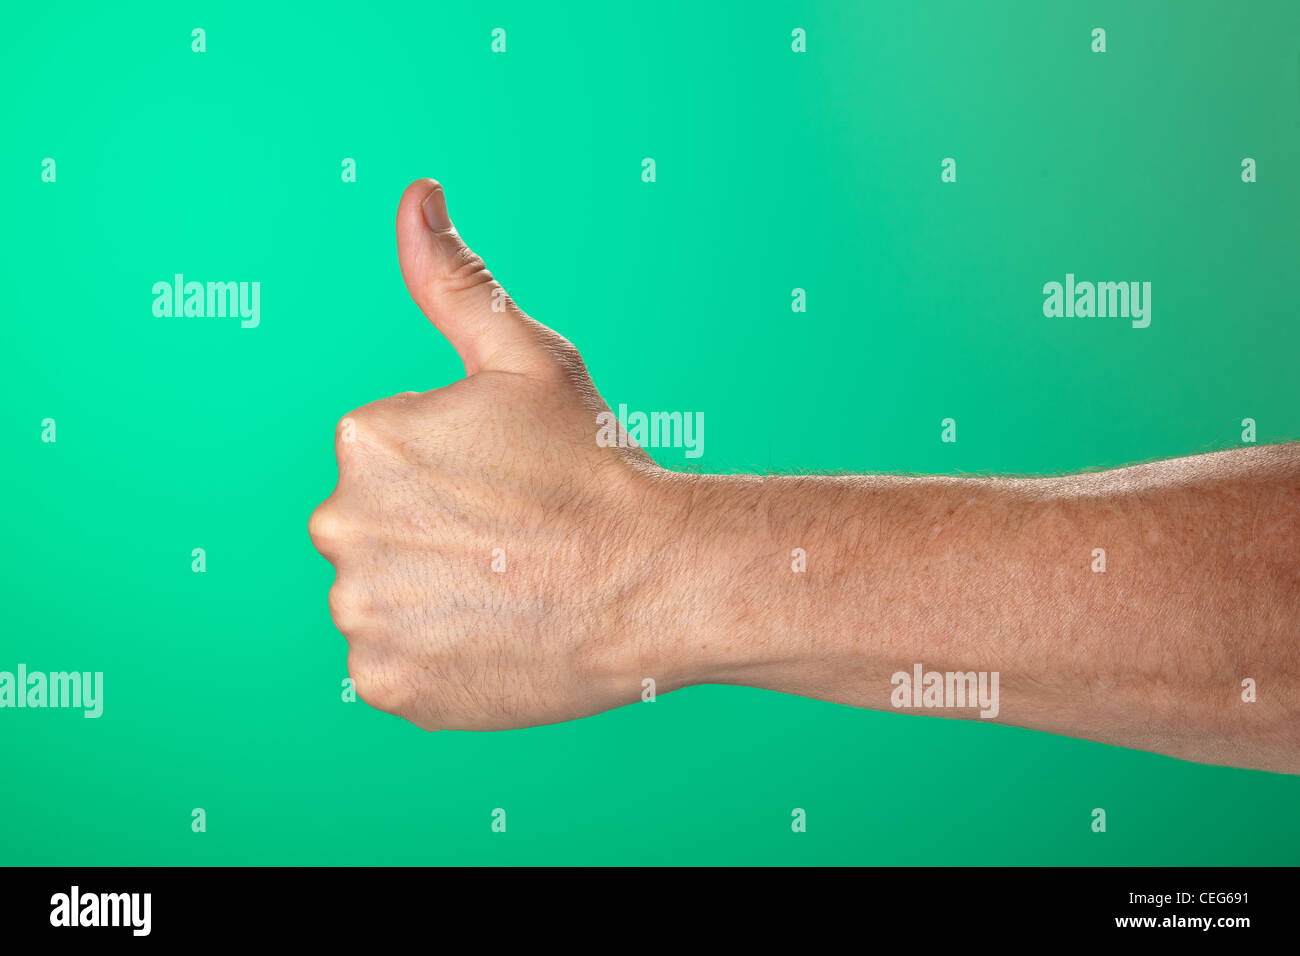 Thumbs Up OK Signal on Green Background Stock Photo